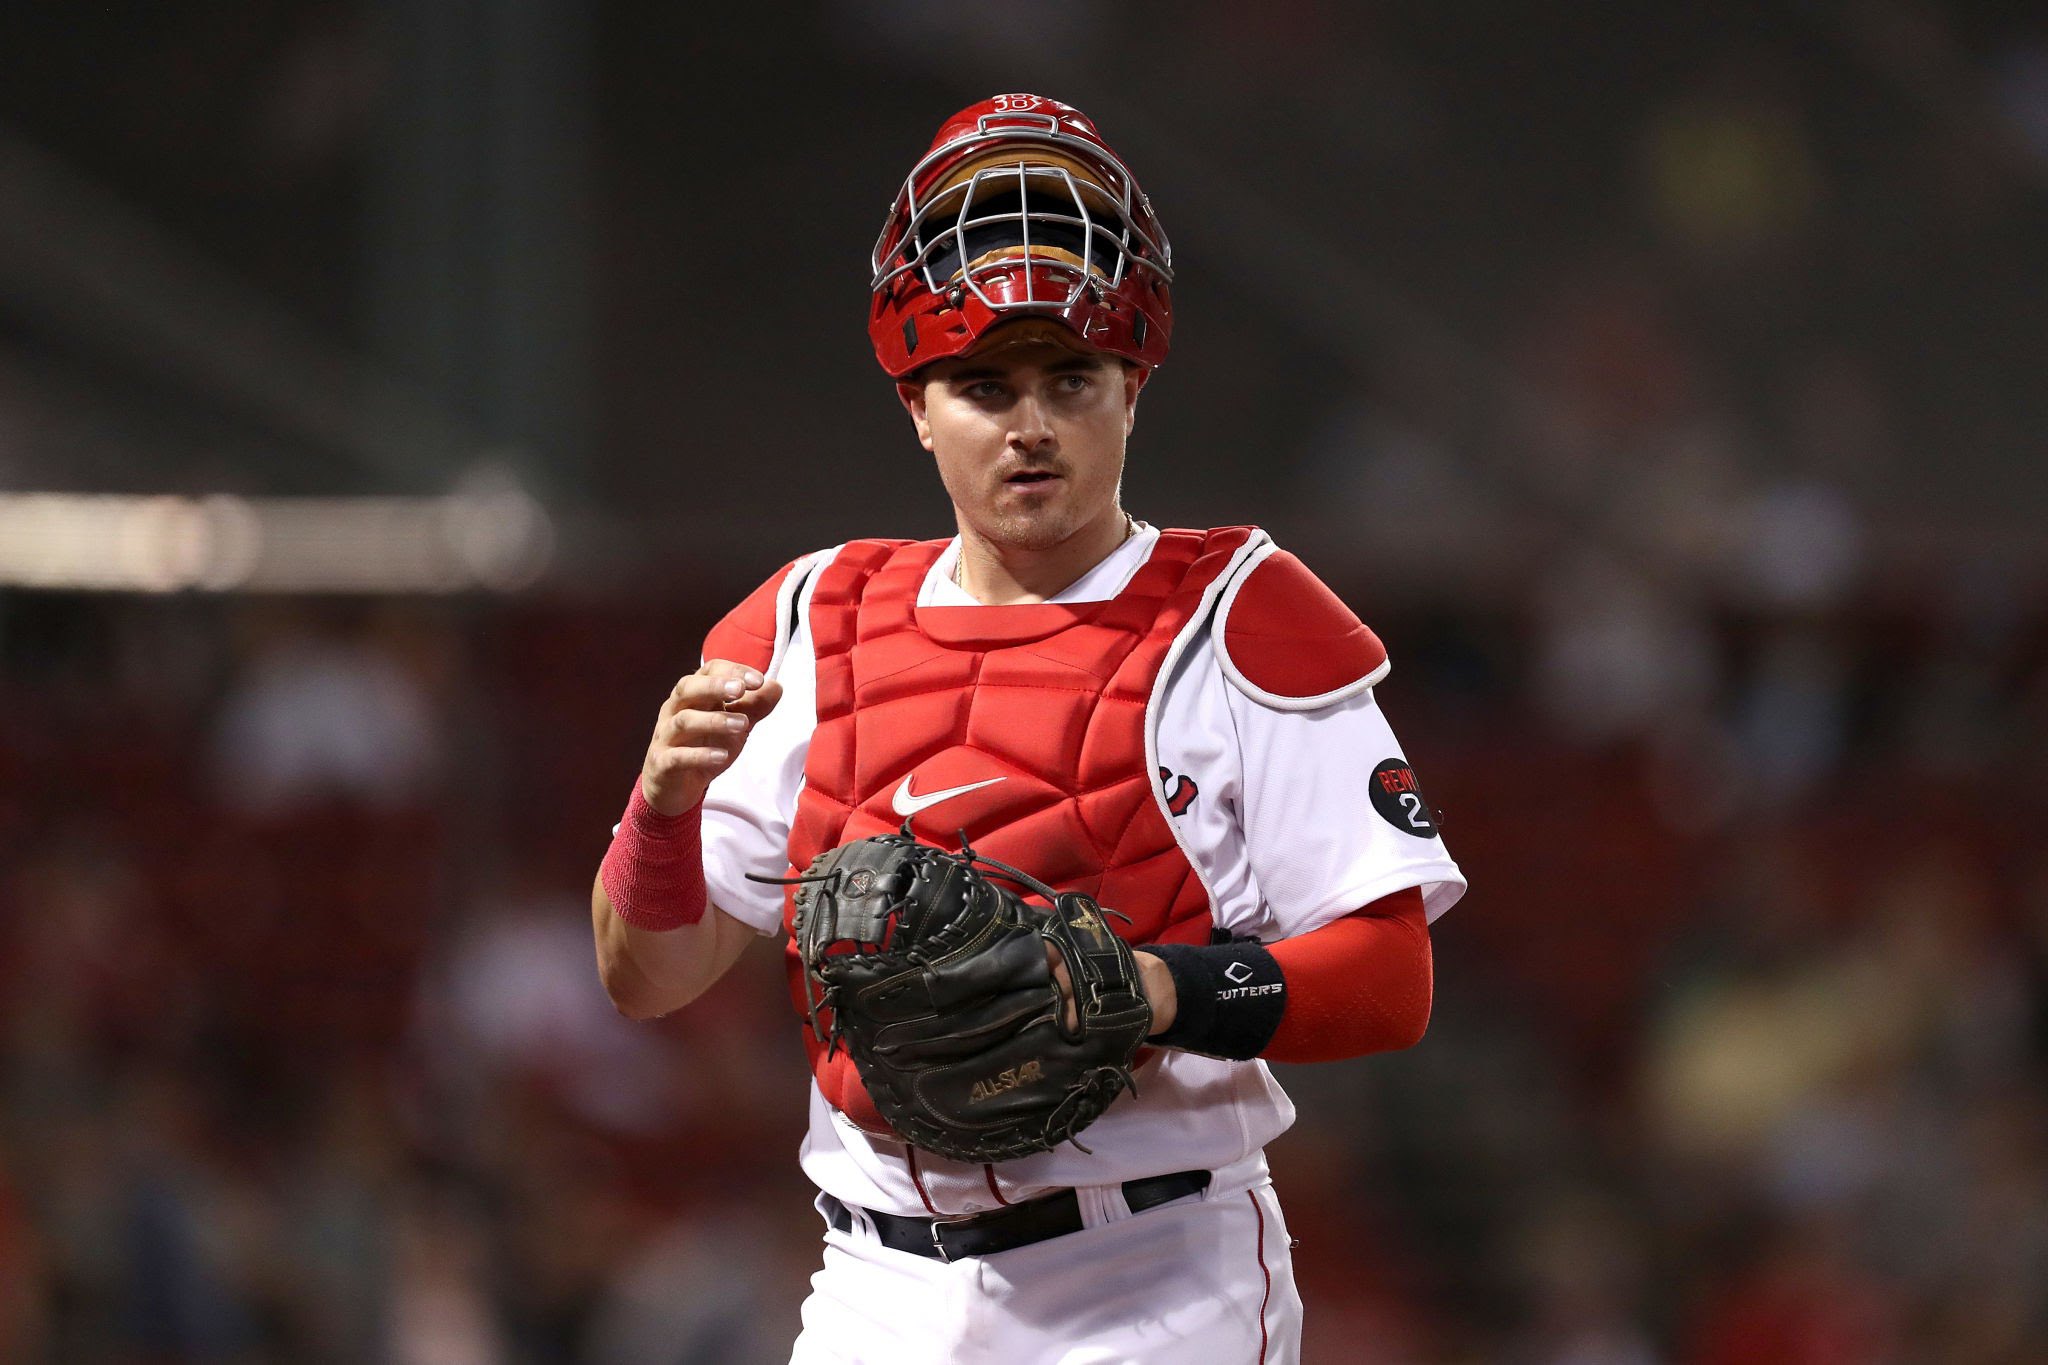 BallPark Buzz on X: How should #RedSox fans feel about Reese McGuire being  the primary catching option heading into the season? Although his time in  Boston was a small sample size, his